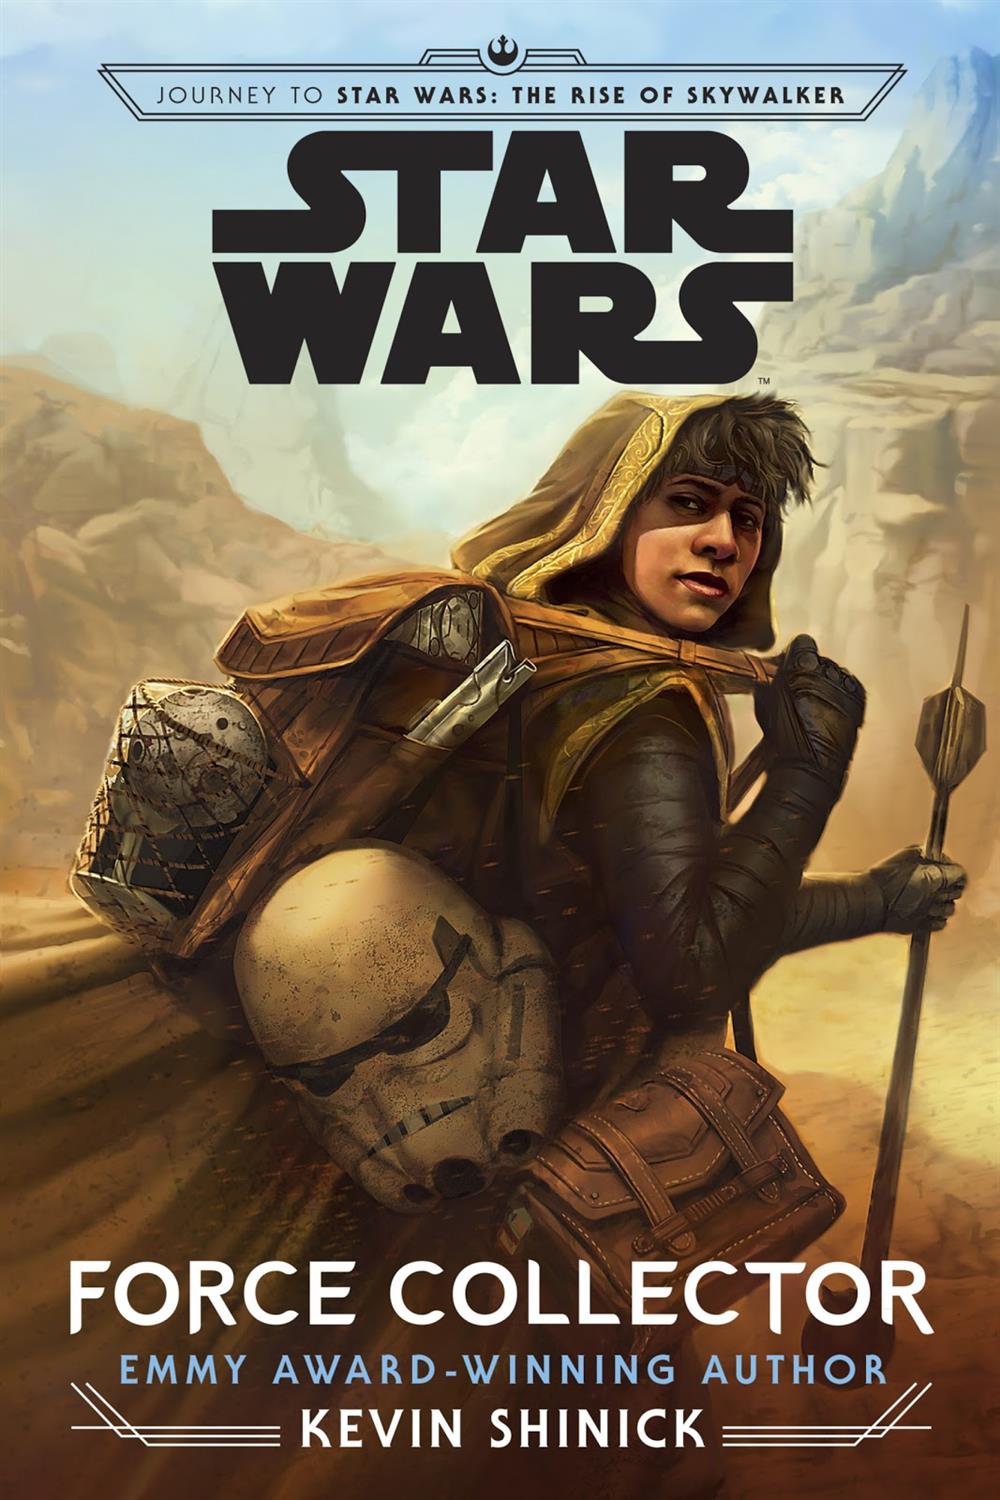 Are there any Star Wars books that focus on the Force-sensitive children?